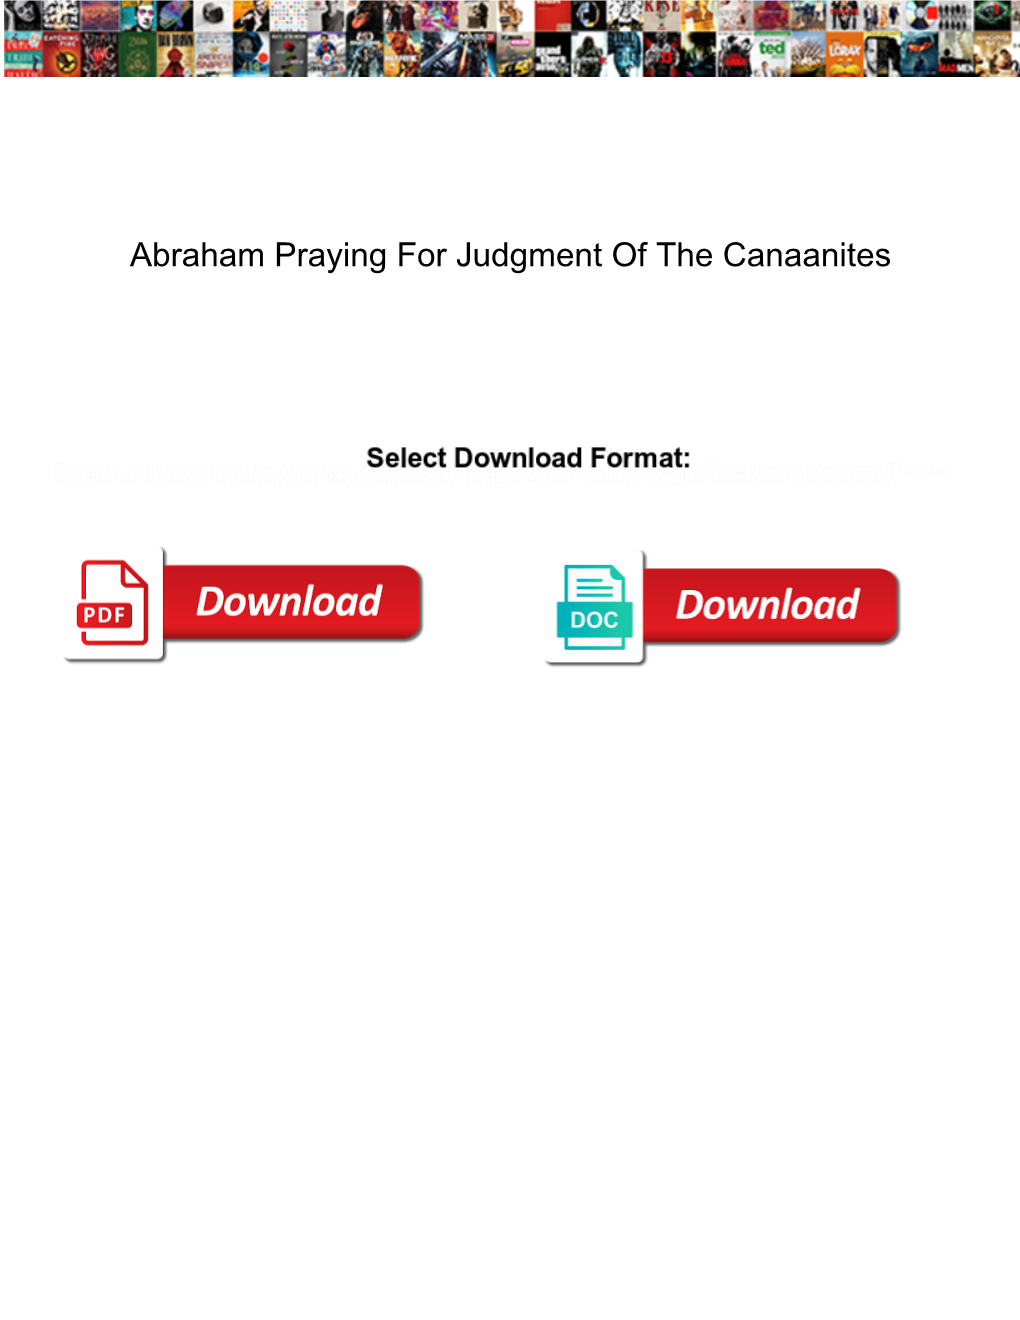 Abraham Praying for Judgment of the Canaanites